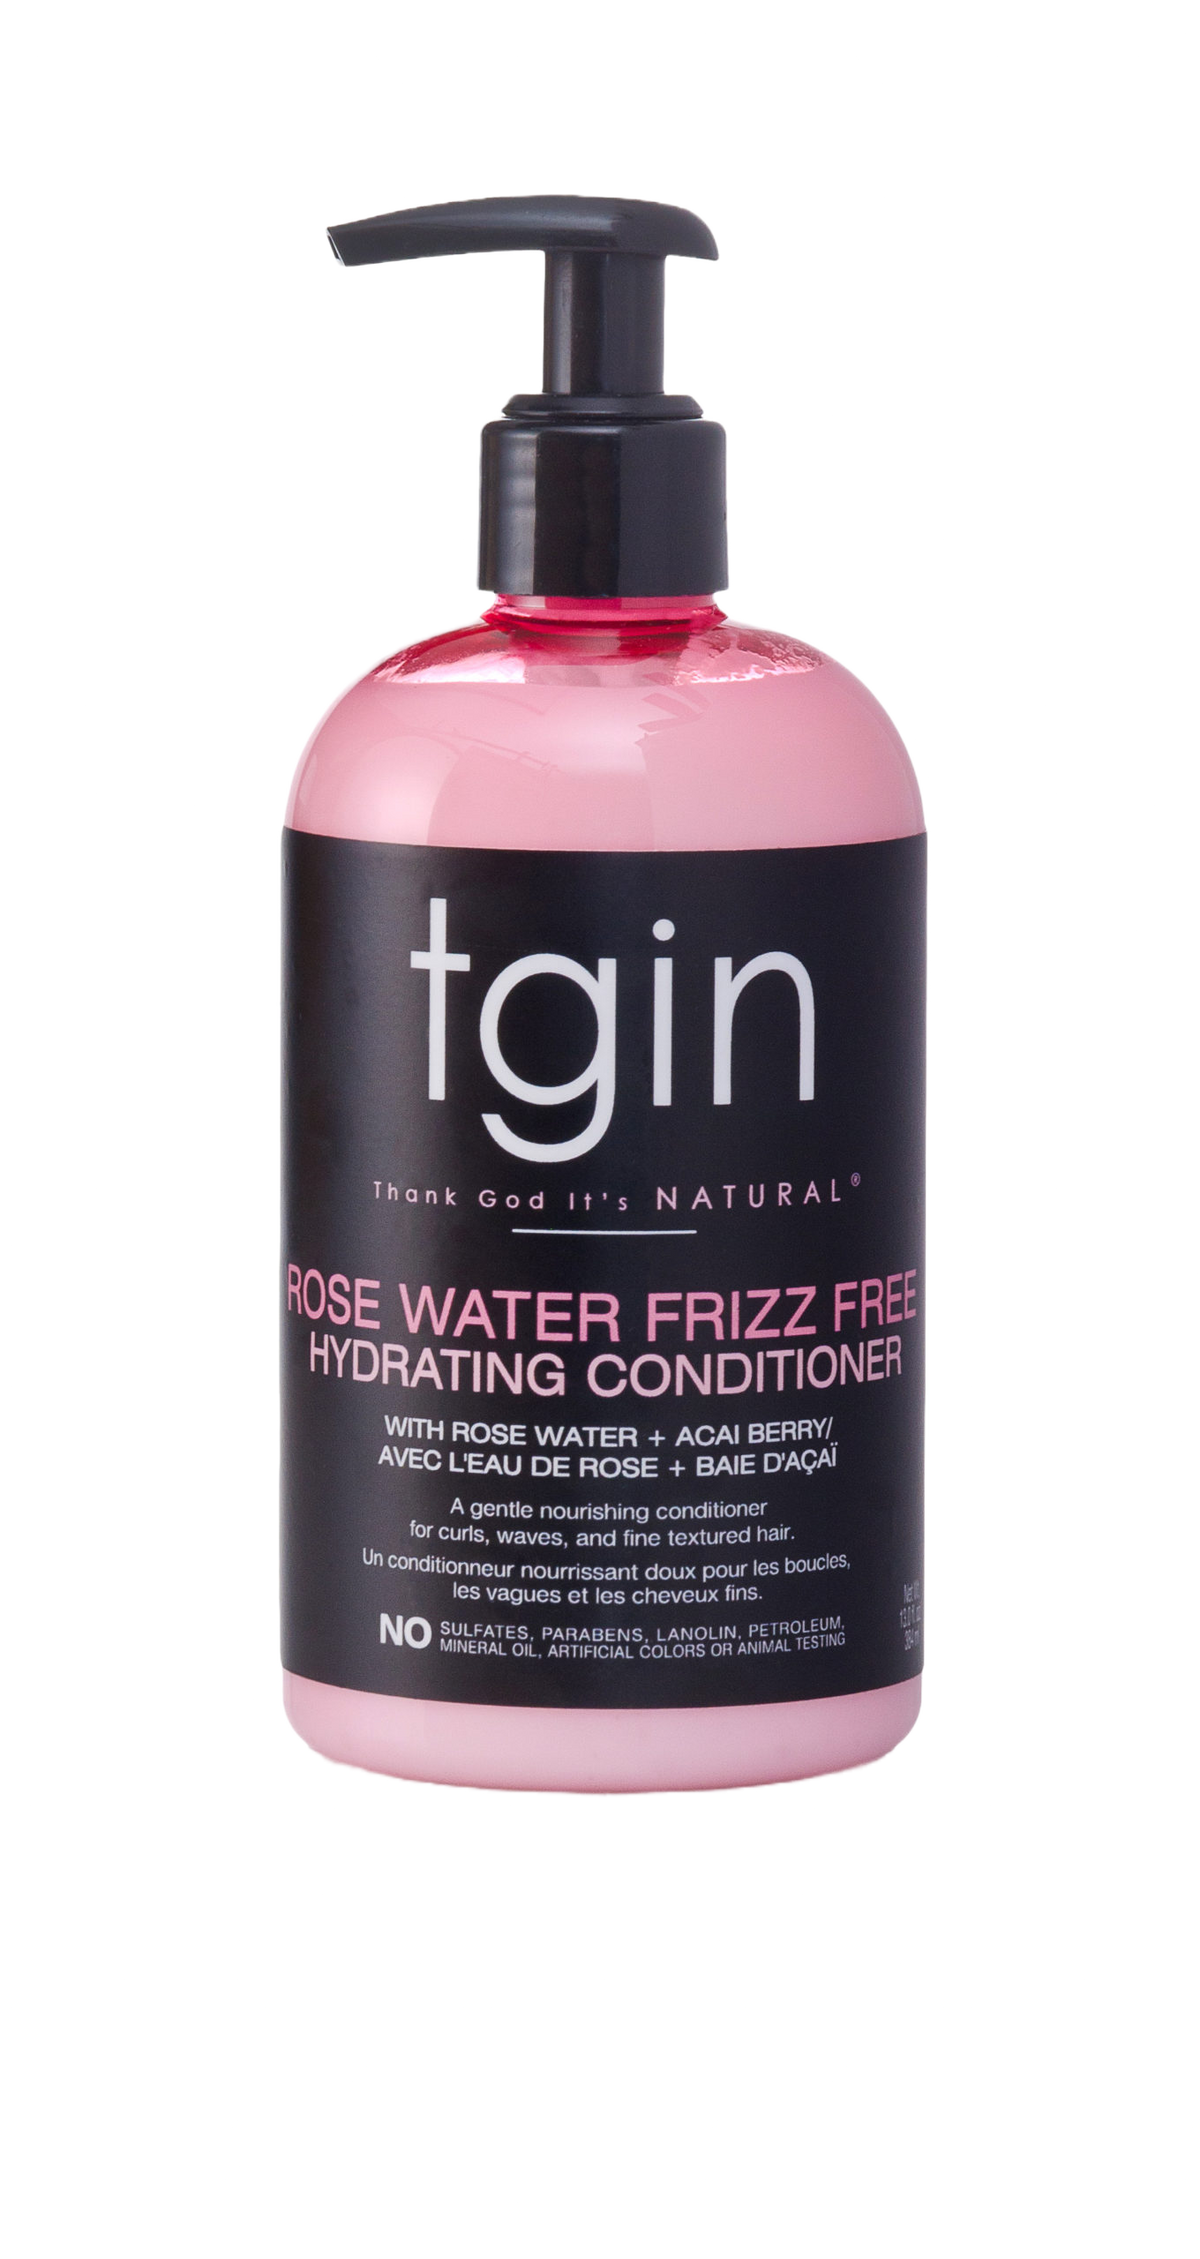 tgin Rose Water Frizz Free Hydrating Conditioner 13oz